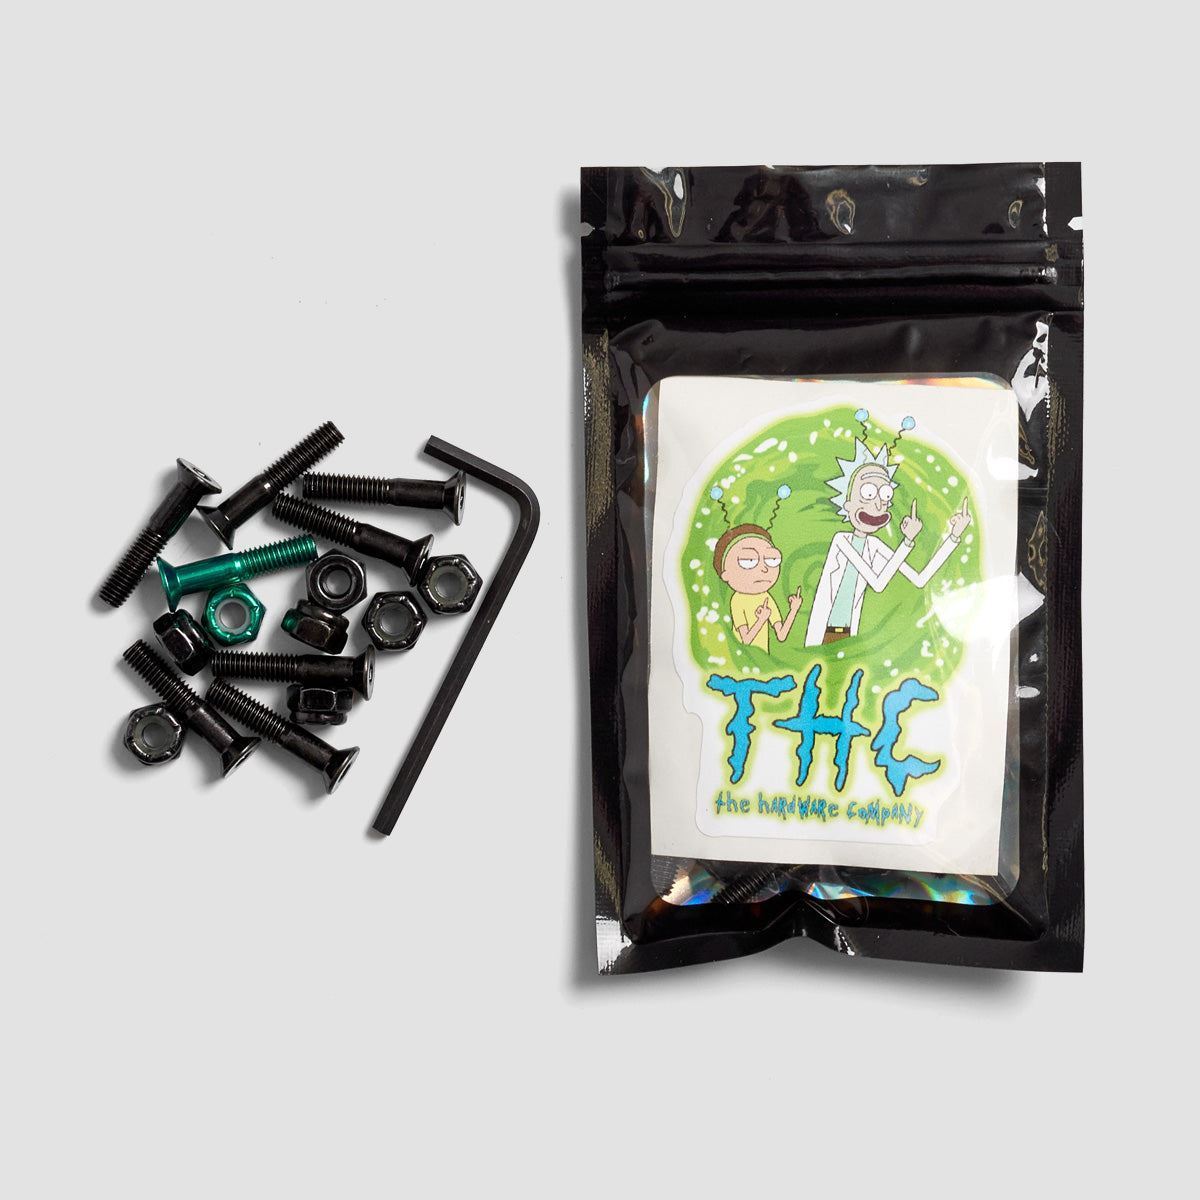 The Hardware Company THC Rick and Morty Allen Truck Bolts Black/Green 1"